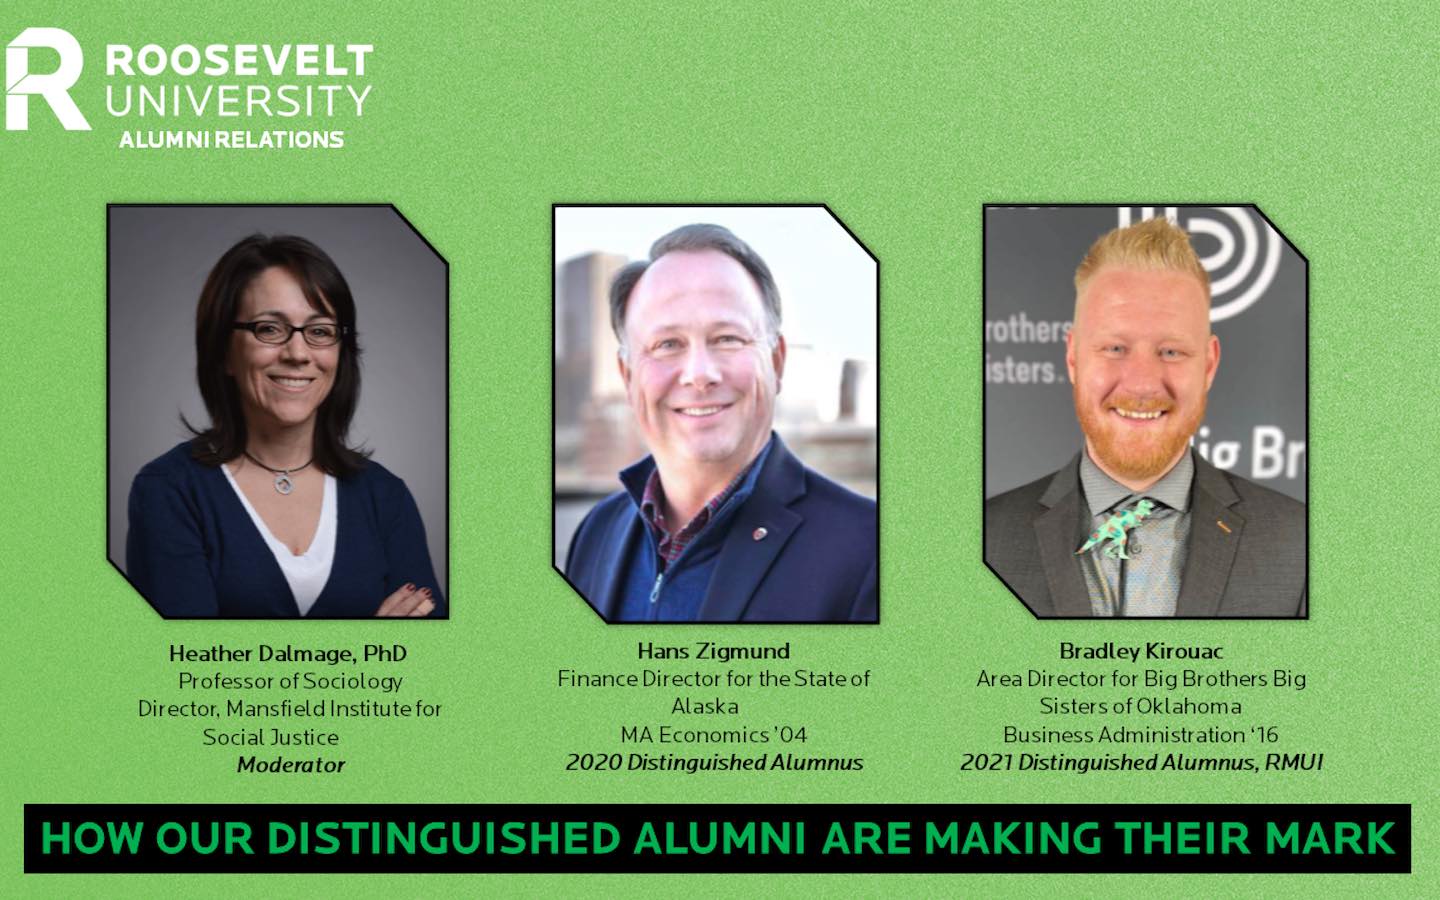 How Distinguished Alumni Are Making Their Mark, featuring Hans Zigmund and Bradley Kirouac, moderated by Heather Dalmage